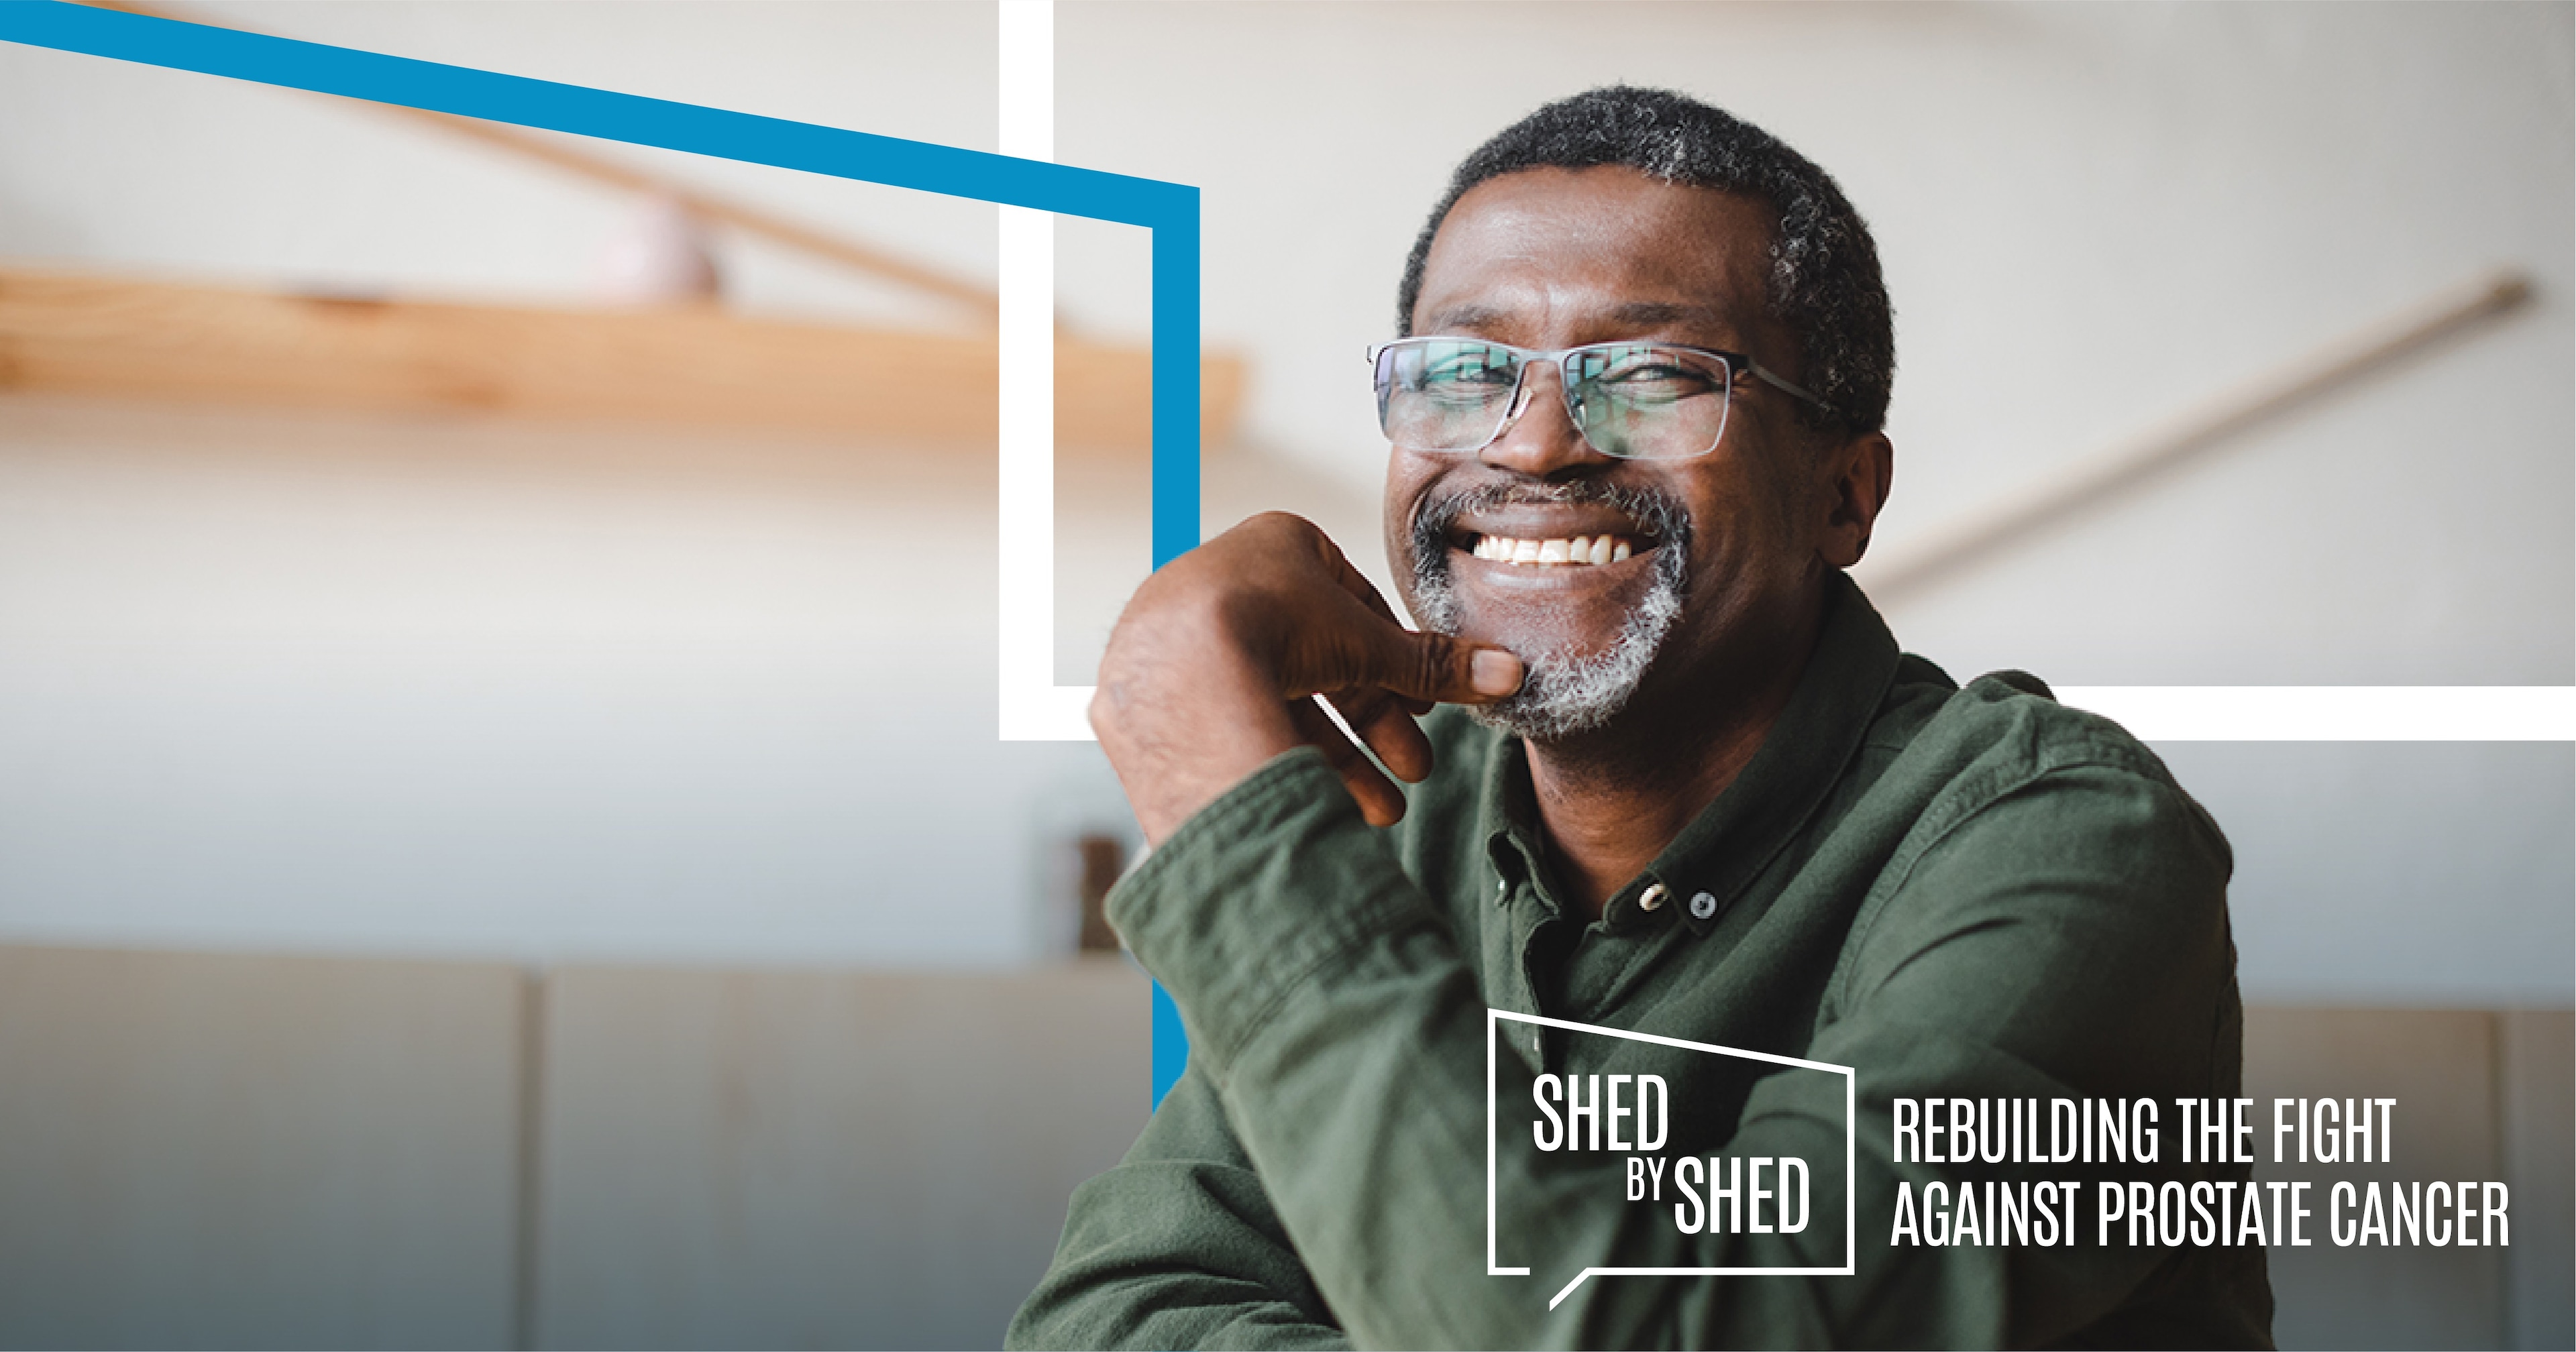 SHED BY SHED: REBUILDING THE FIGHT AGAINST PROSTATE CANCER